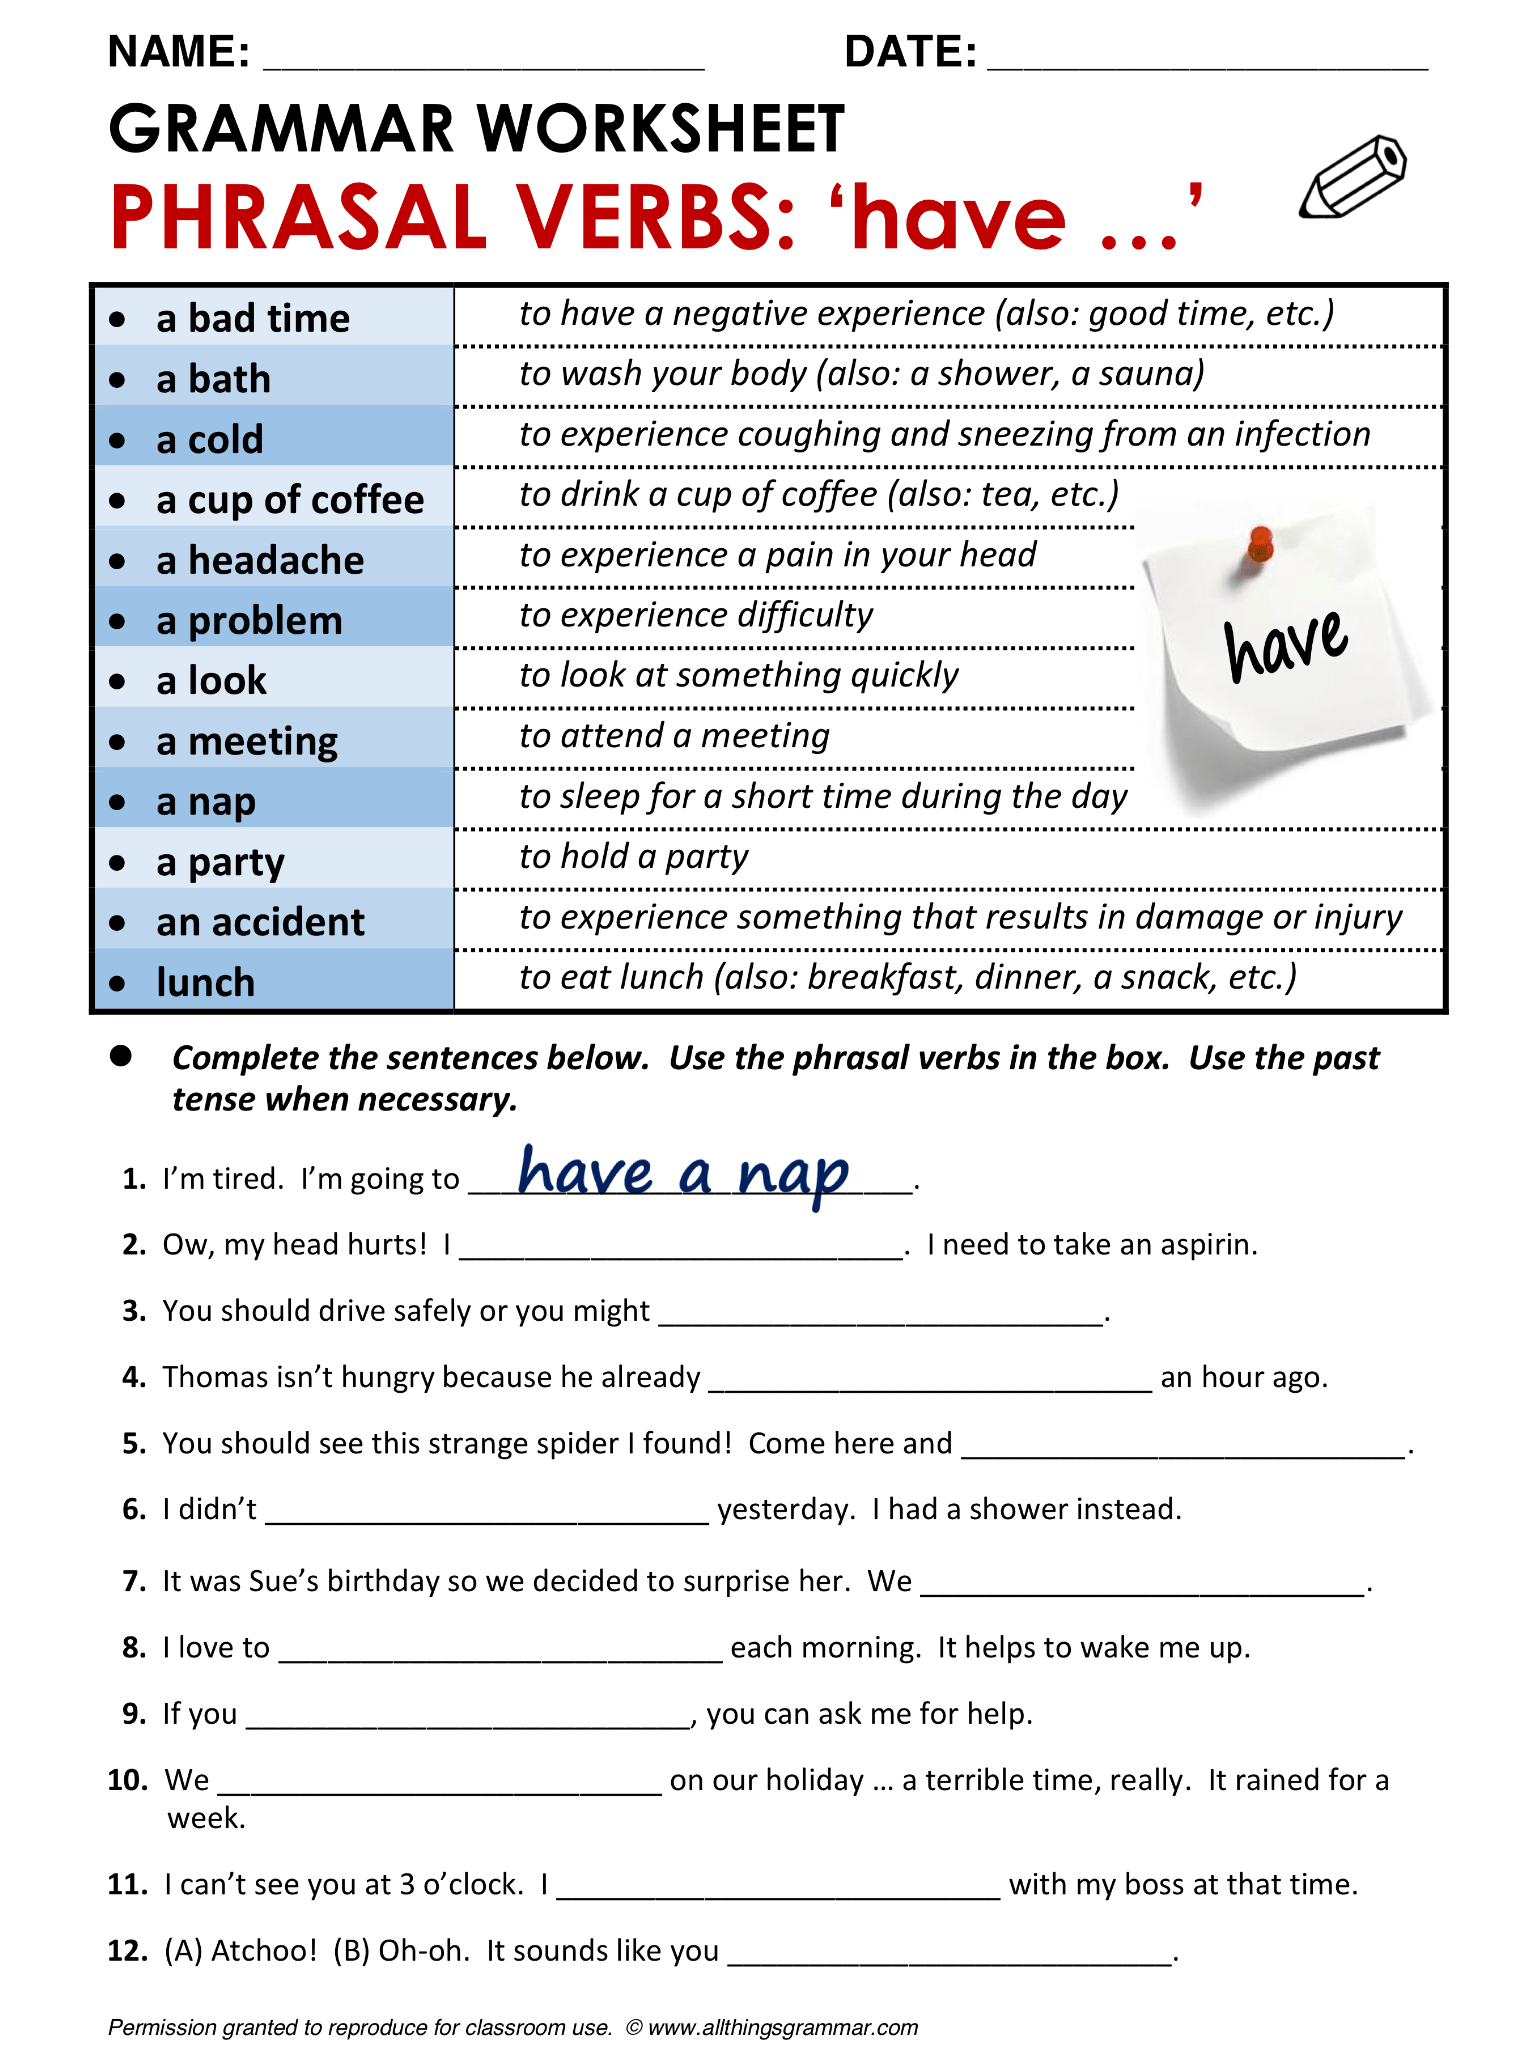 free-printable-grammar-worksheets-for-highschool-students-peggy